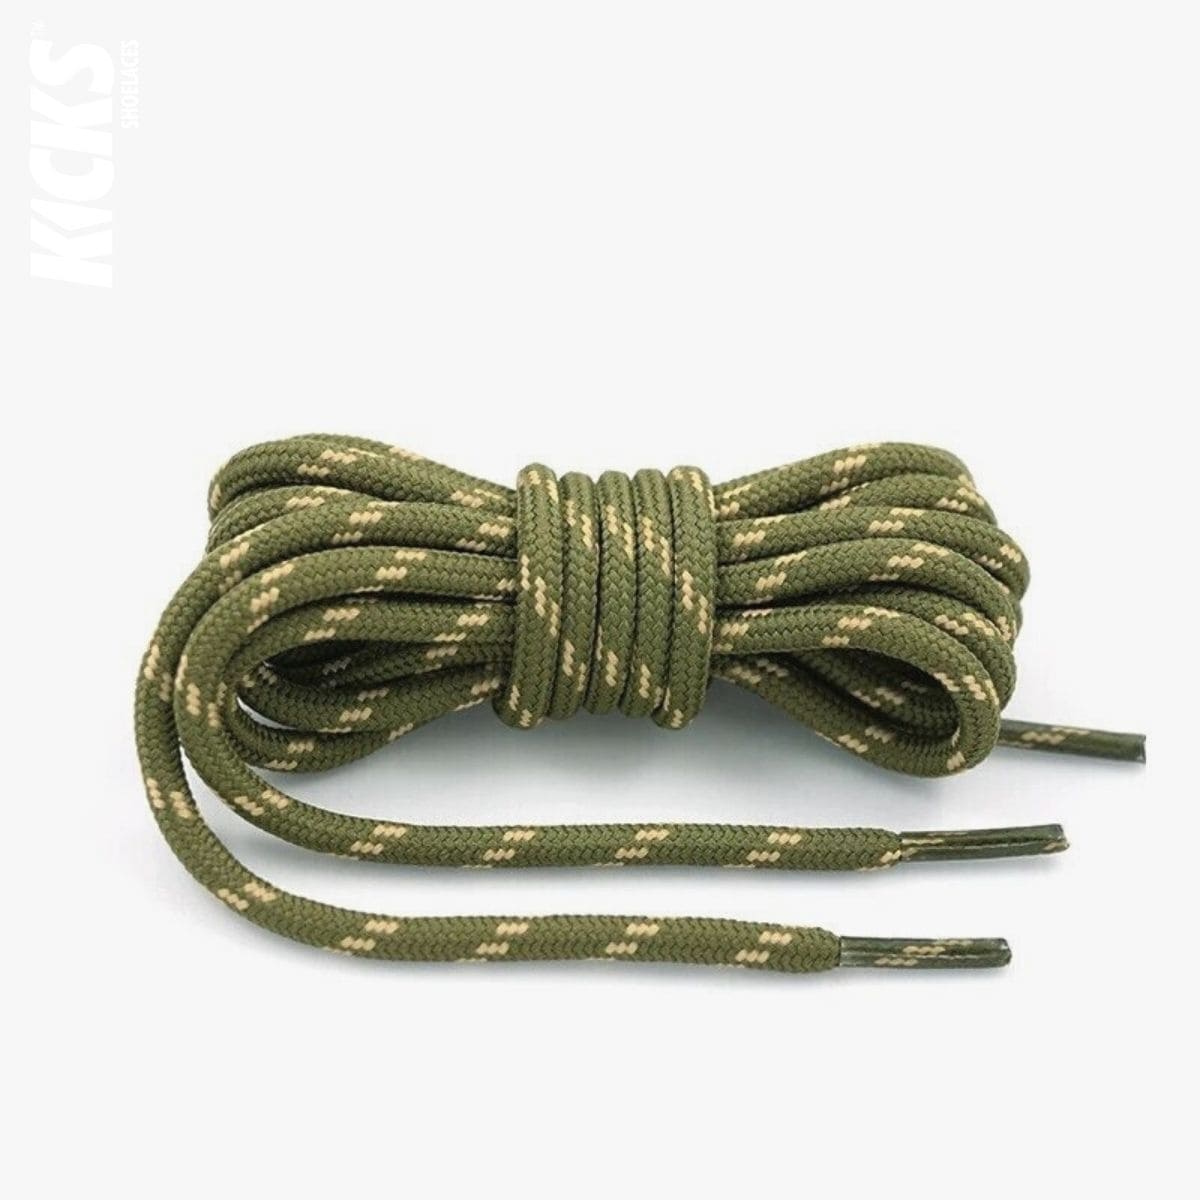 trekking-shoe-laces-united-states-in-army-green-and-yellow-shop-online